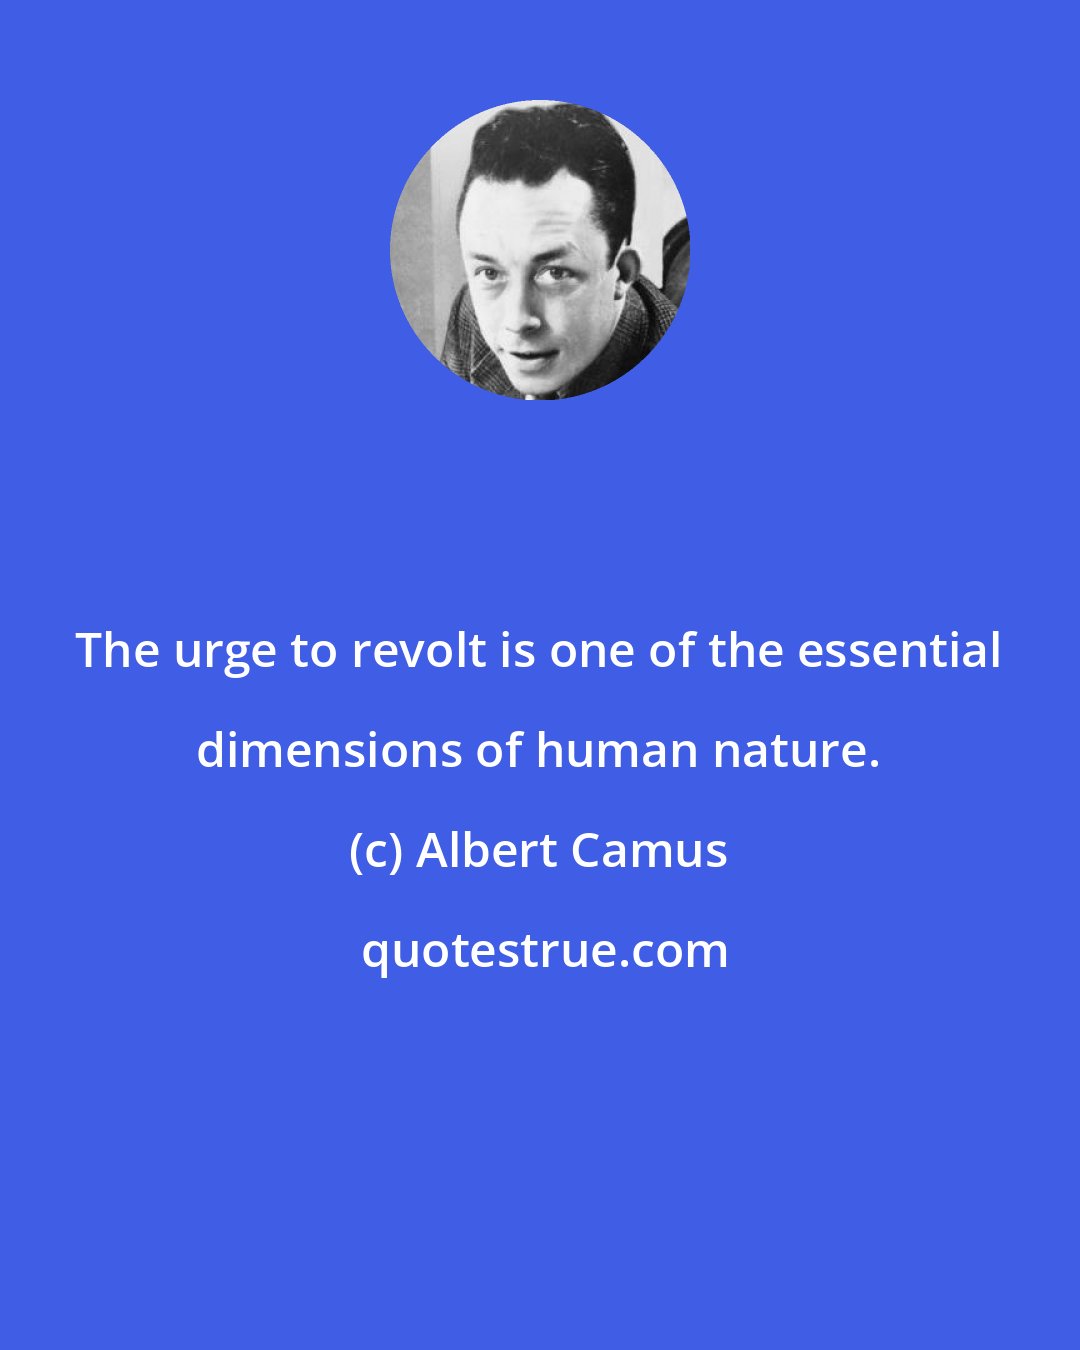 Albert Camus: The urge to revolt is one of the essential dimensions of human nature.